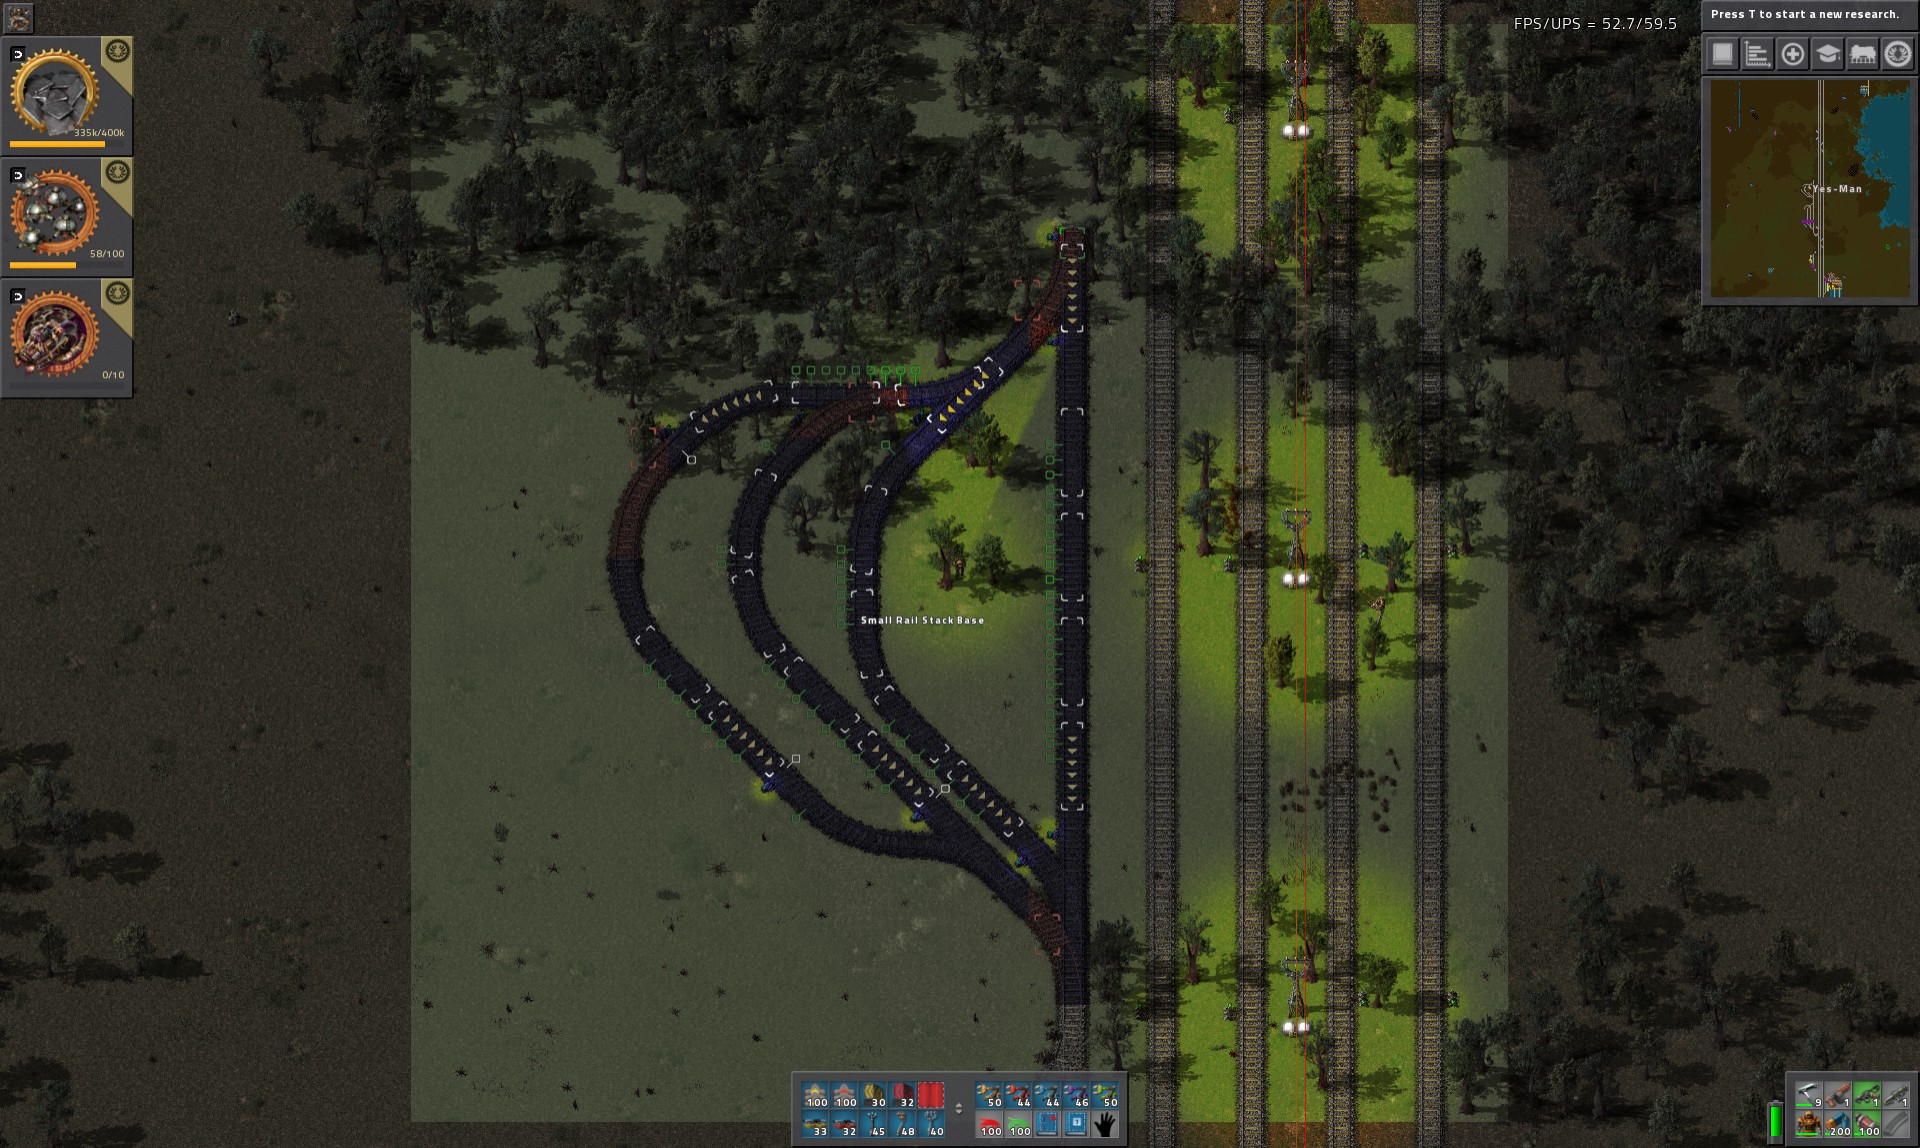 Some curved rails were not placed and I can't force the bots to do so.